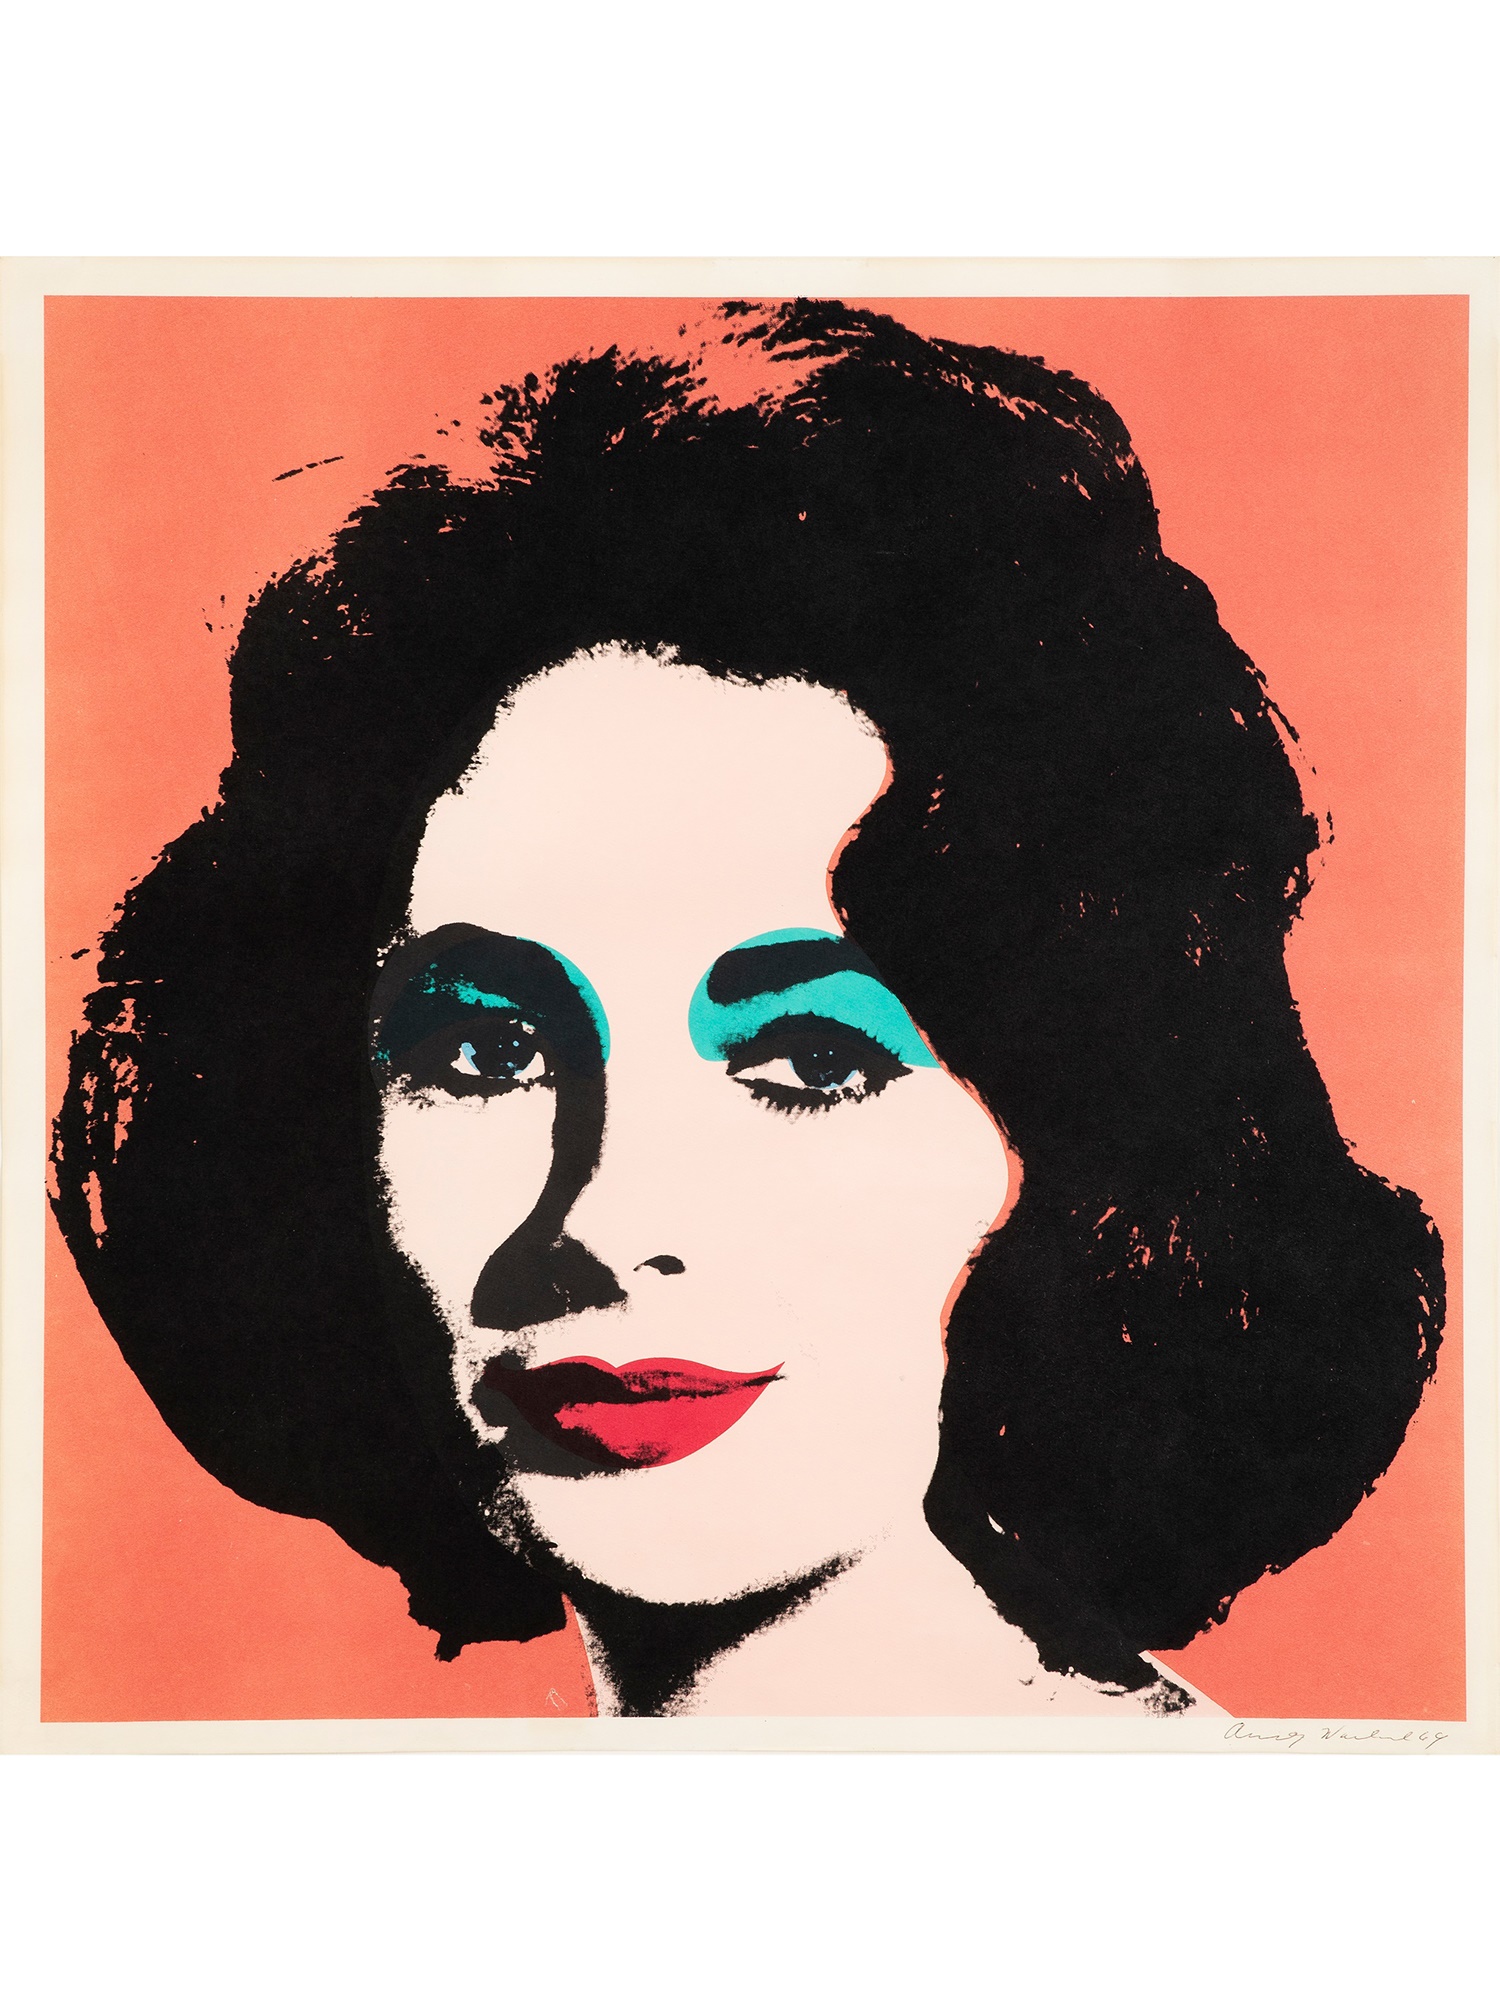 Andy Warhol (American 1928-1987) | Liz, 1964 (F. & S. II. 7) | £25,000 - £35,000 + fees | To be offered in MODERN MADE, 28 October 2022